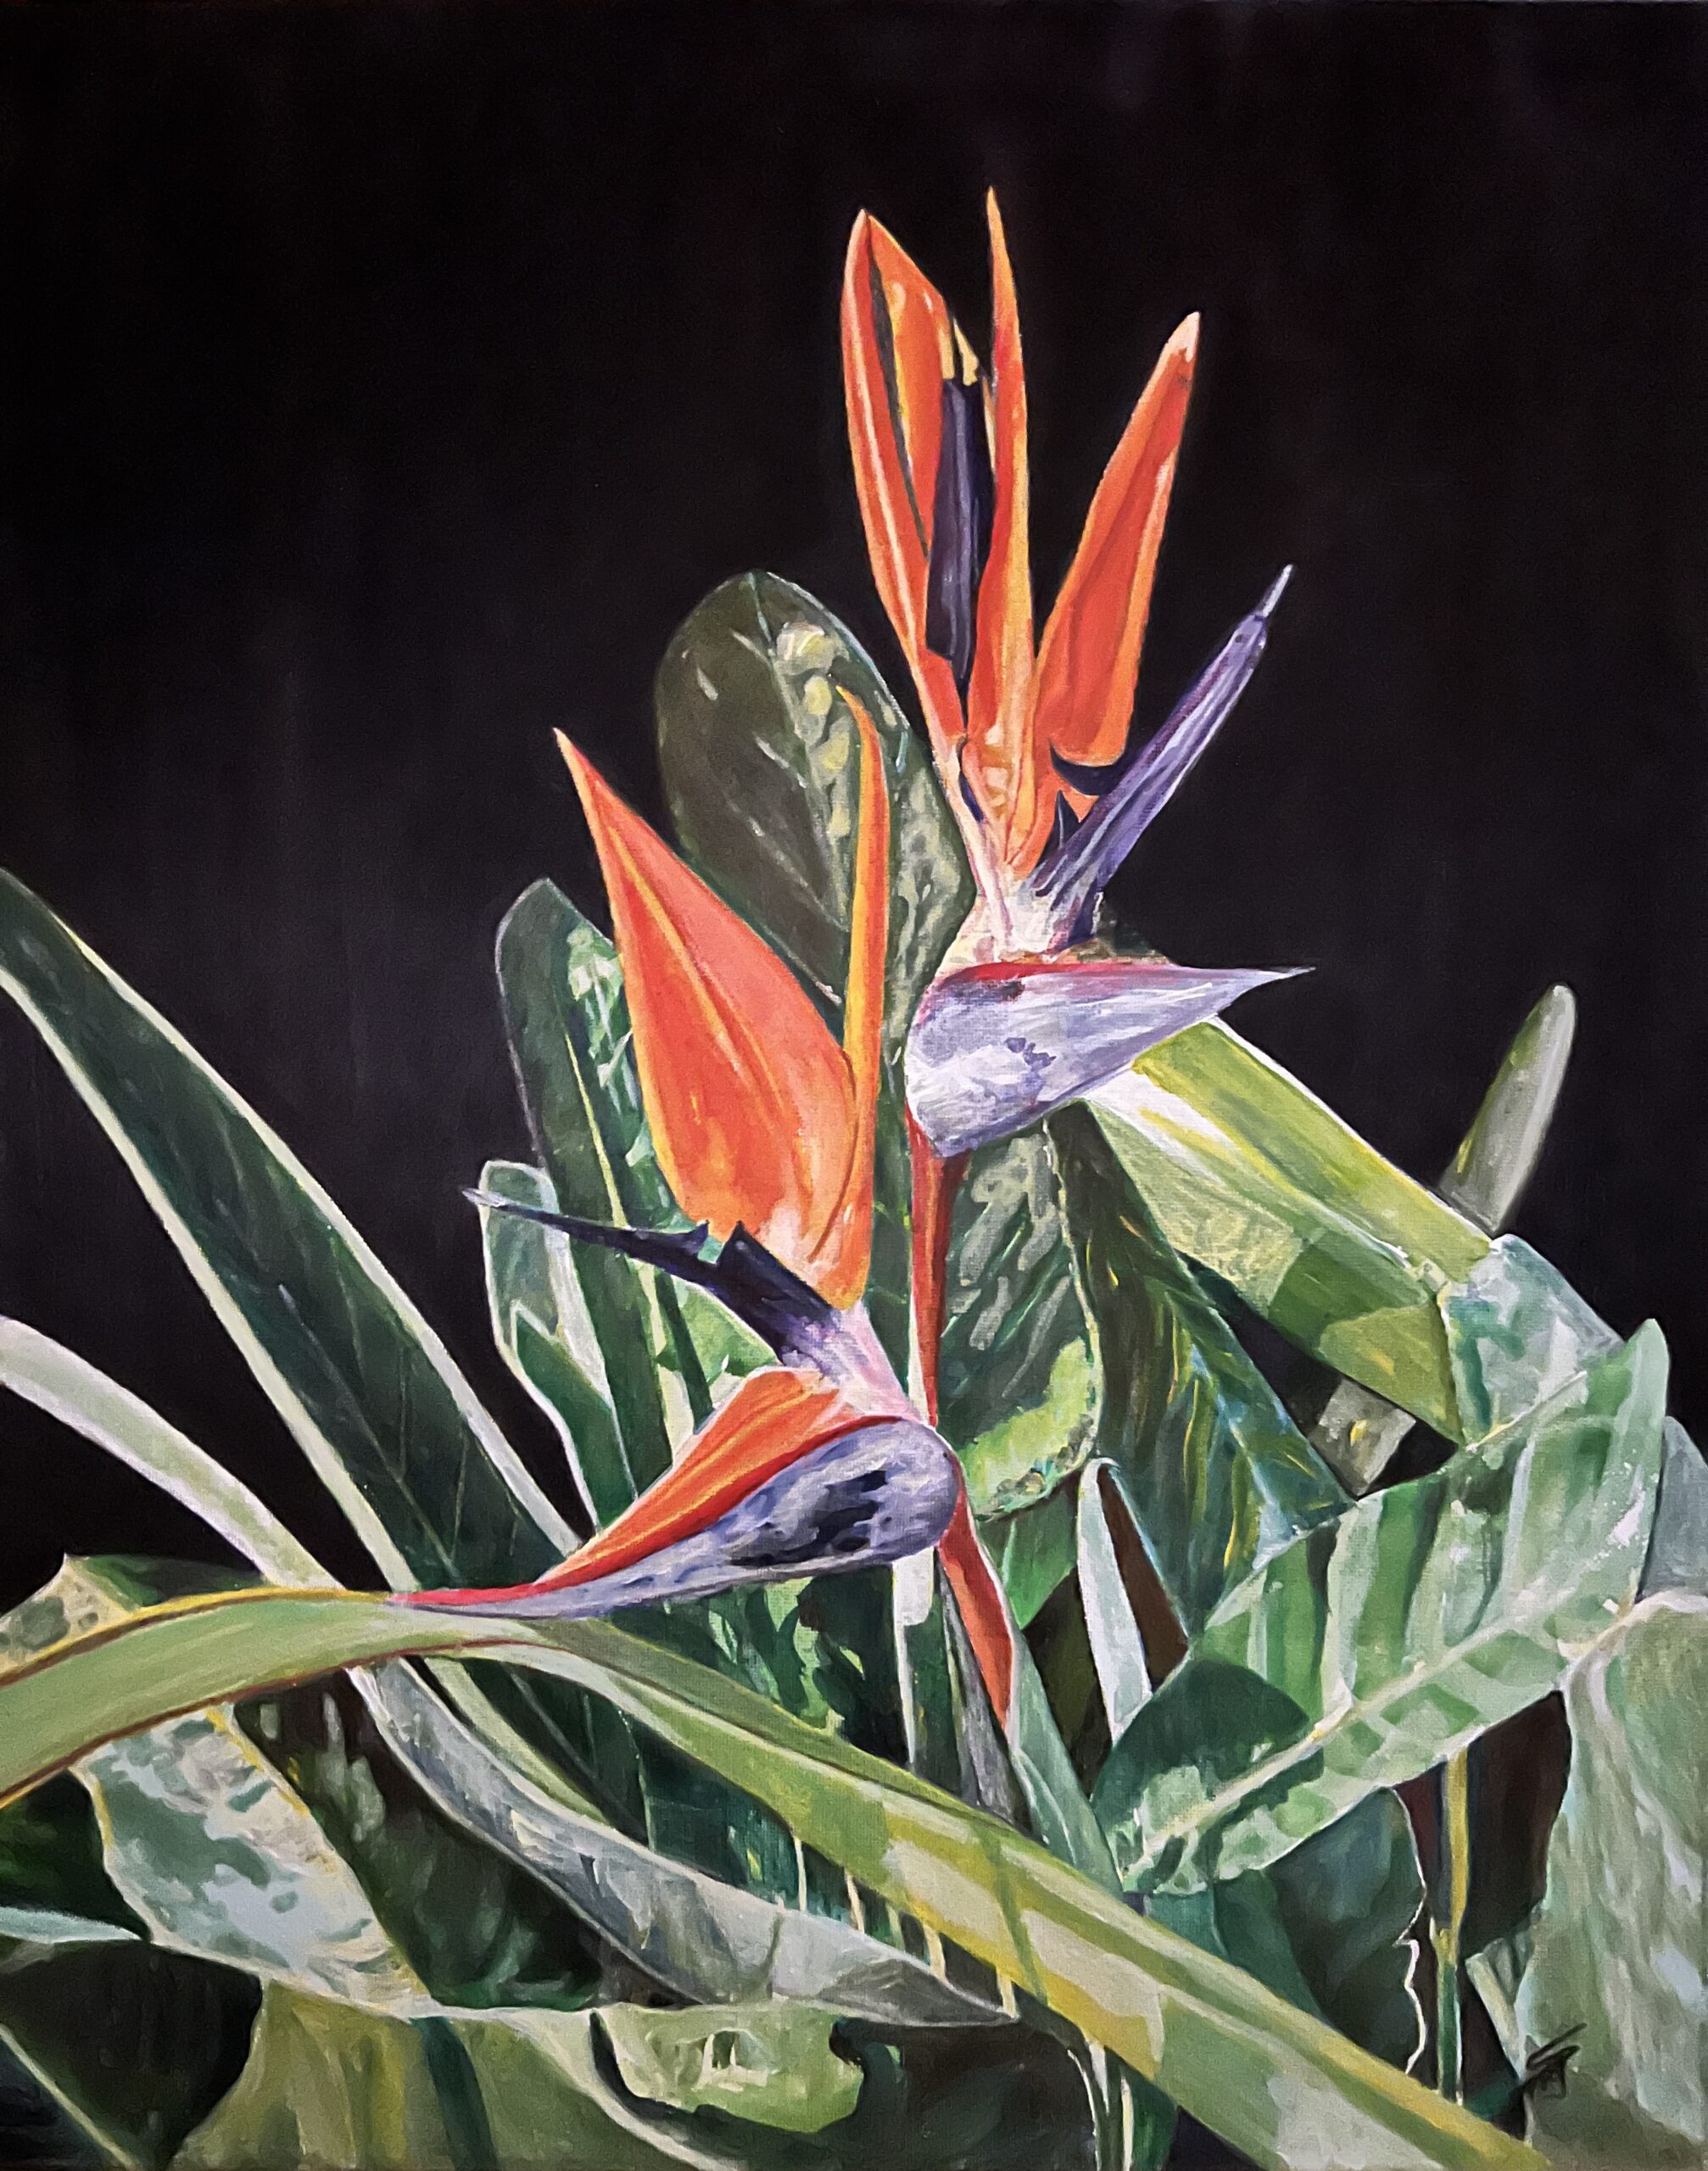 A painting of a bird of paradise flower that is red and purple against it's green shiny leaves